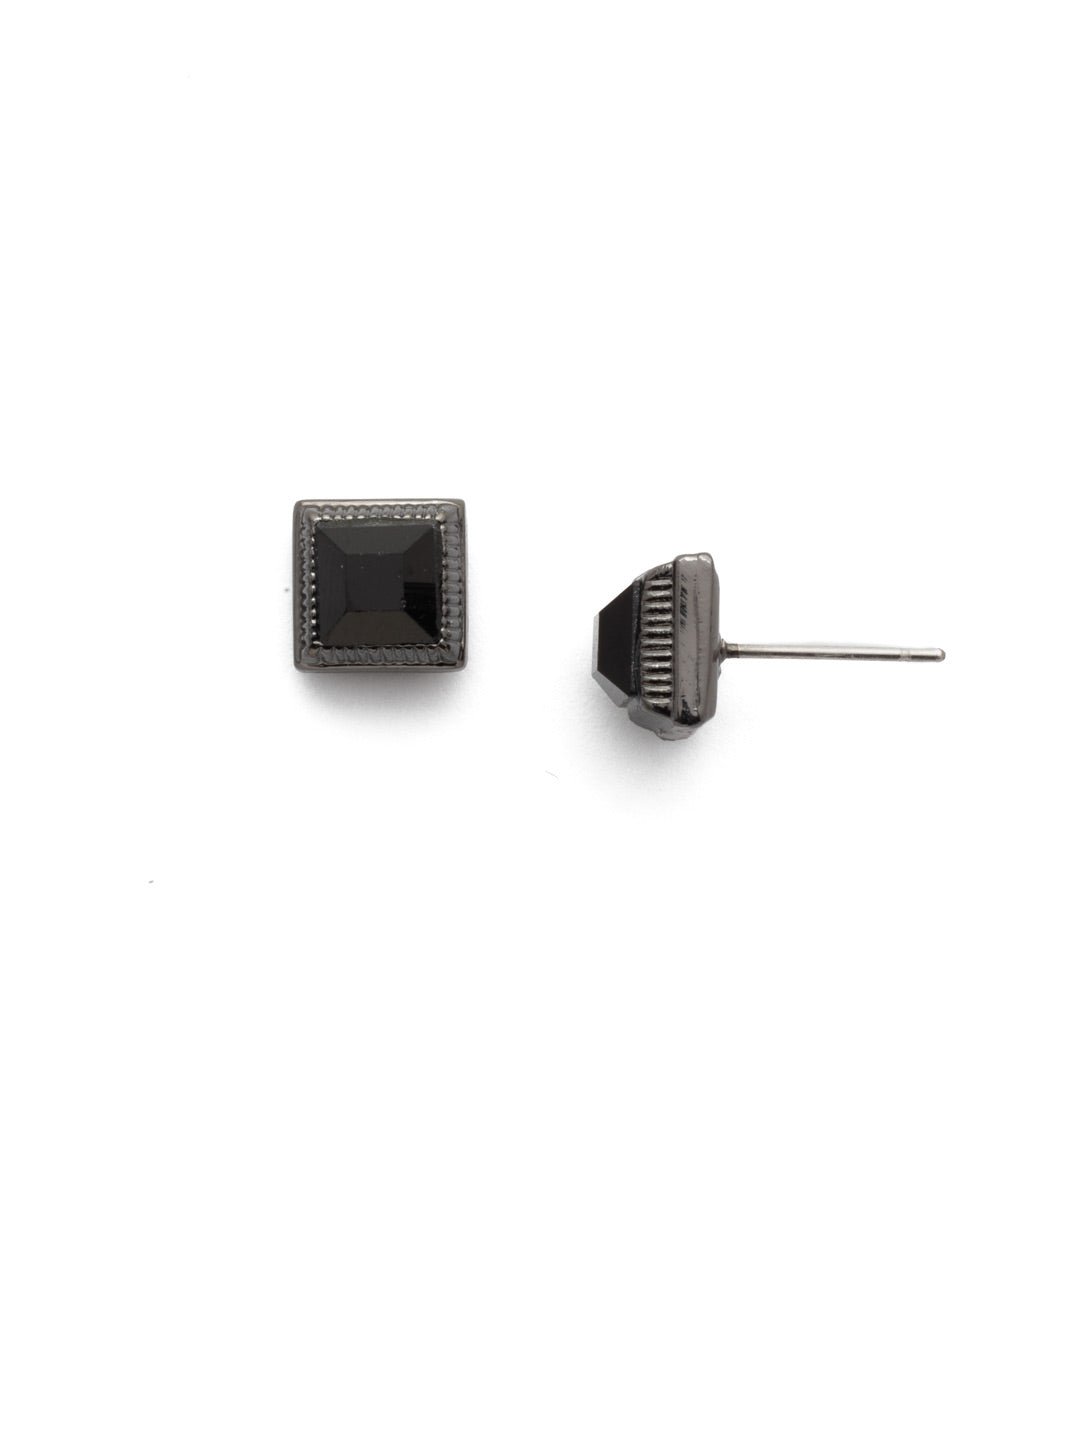 Pasquelina Stud Earring - EEA16GMMMO - Simplistic yet beautiful, our Pasquelina post earrings make the perfect addition to any jewelry lover's collection From Sorrelli's Midnight Moon collection in our Gun Metal finish.